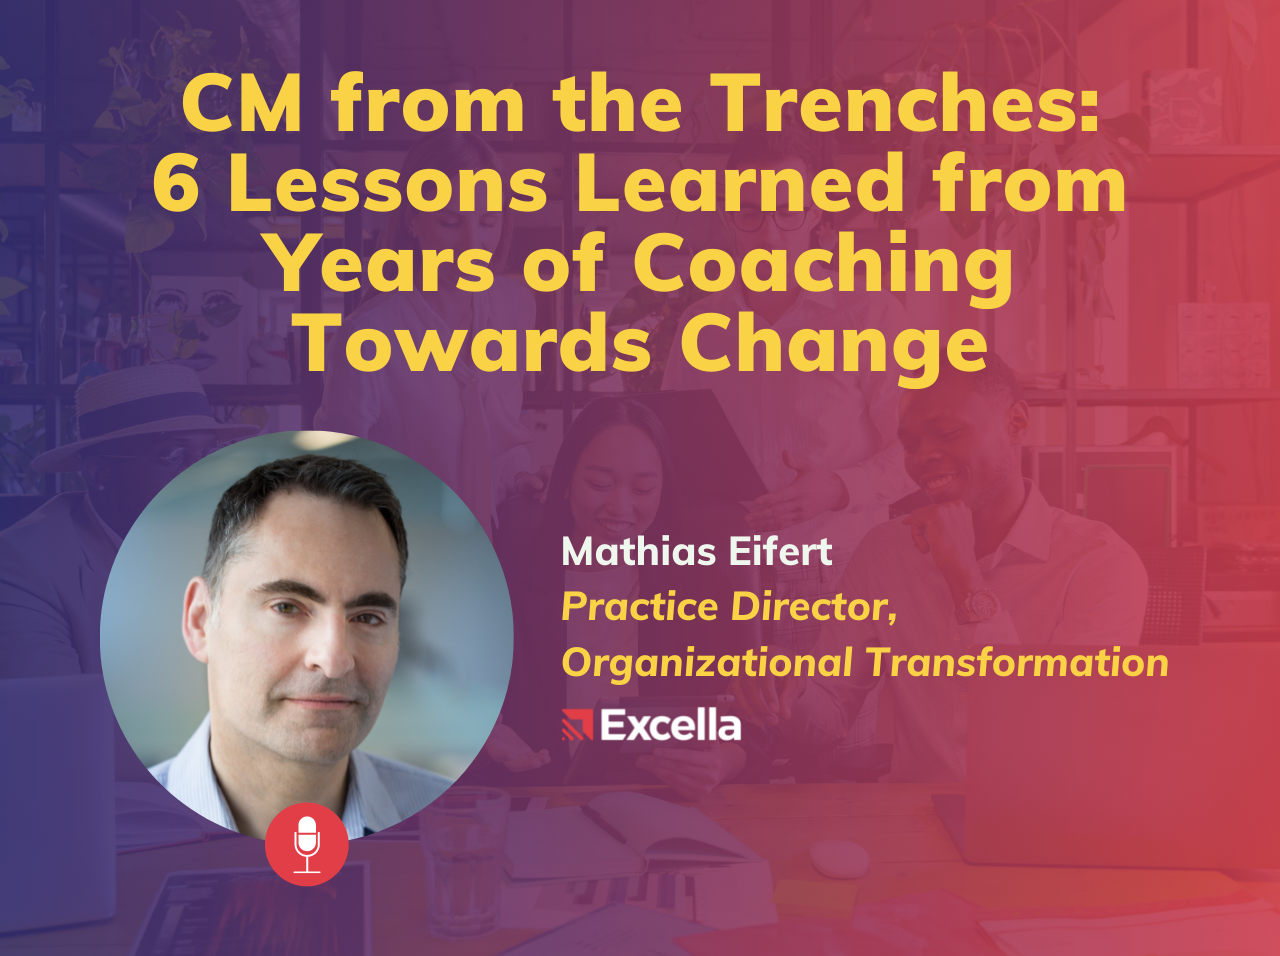 CM From the Trenches 6 Lessons Learned from Years of Coaching Towards Change